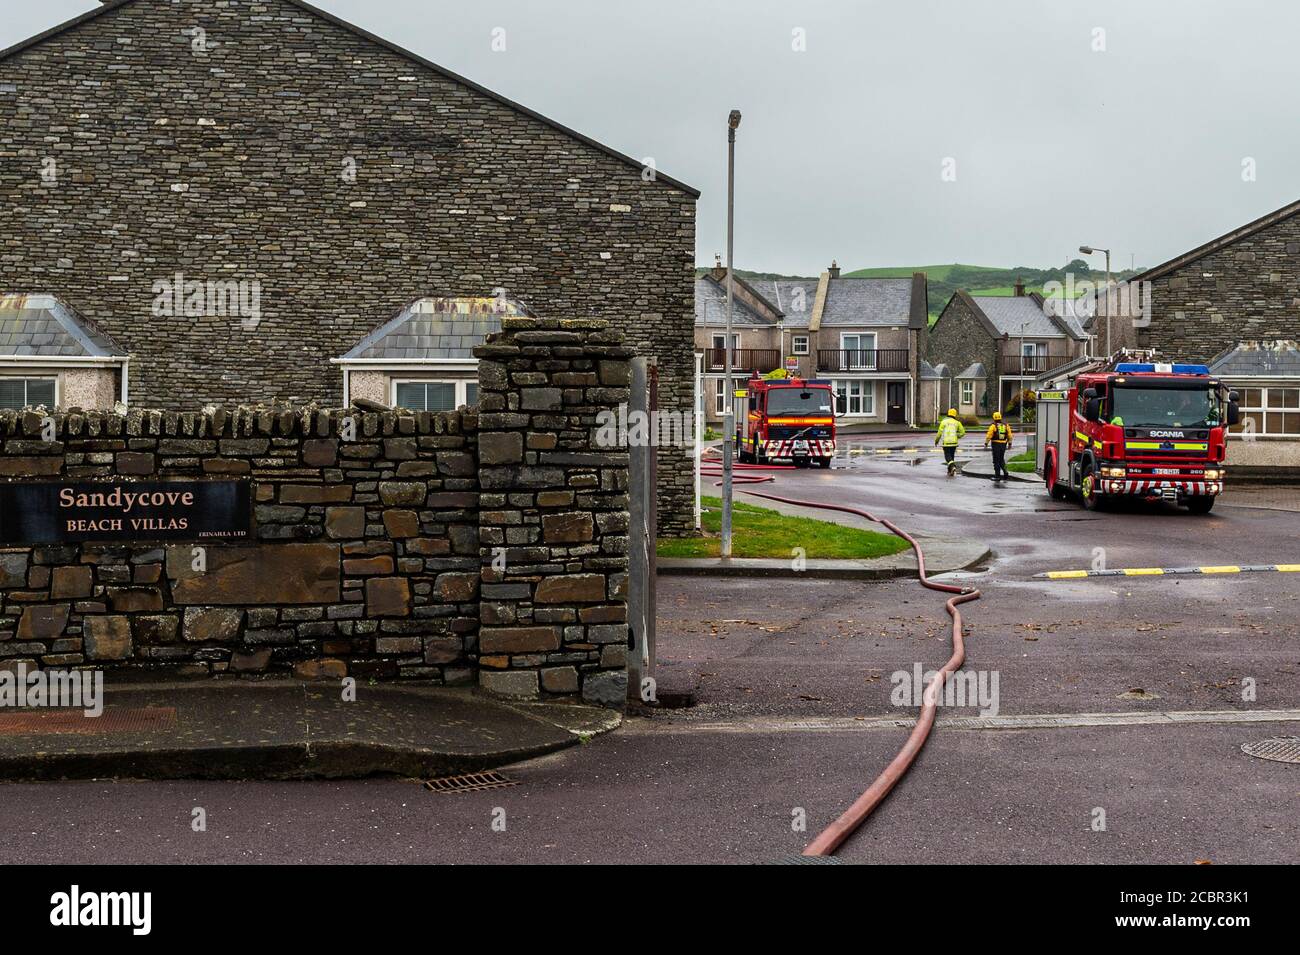 Owenahincha, West Cork, Ireland. 15th Aug, 2020. Firefighters start to pack away their equipment after spending most of the night at Sandycove Beach Villas pumping flood water in a successful attempt to stop the houses becoming overrun with water. Credit: AG News/Alamy Live News Stock Photo